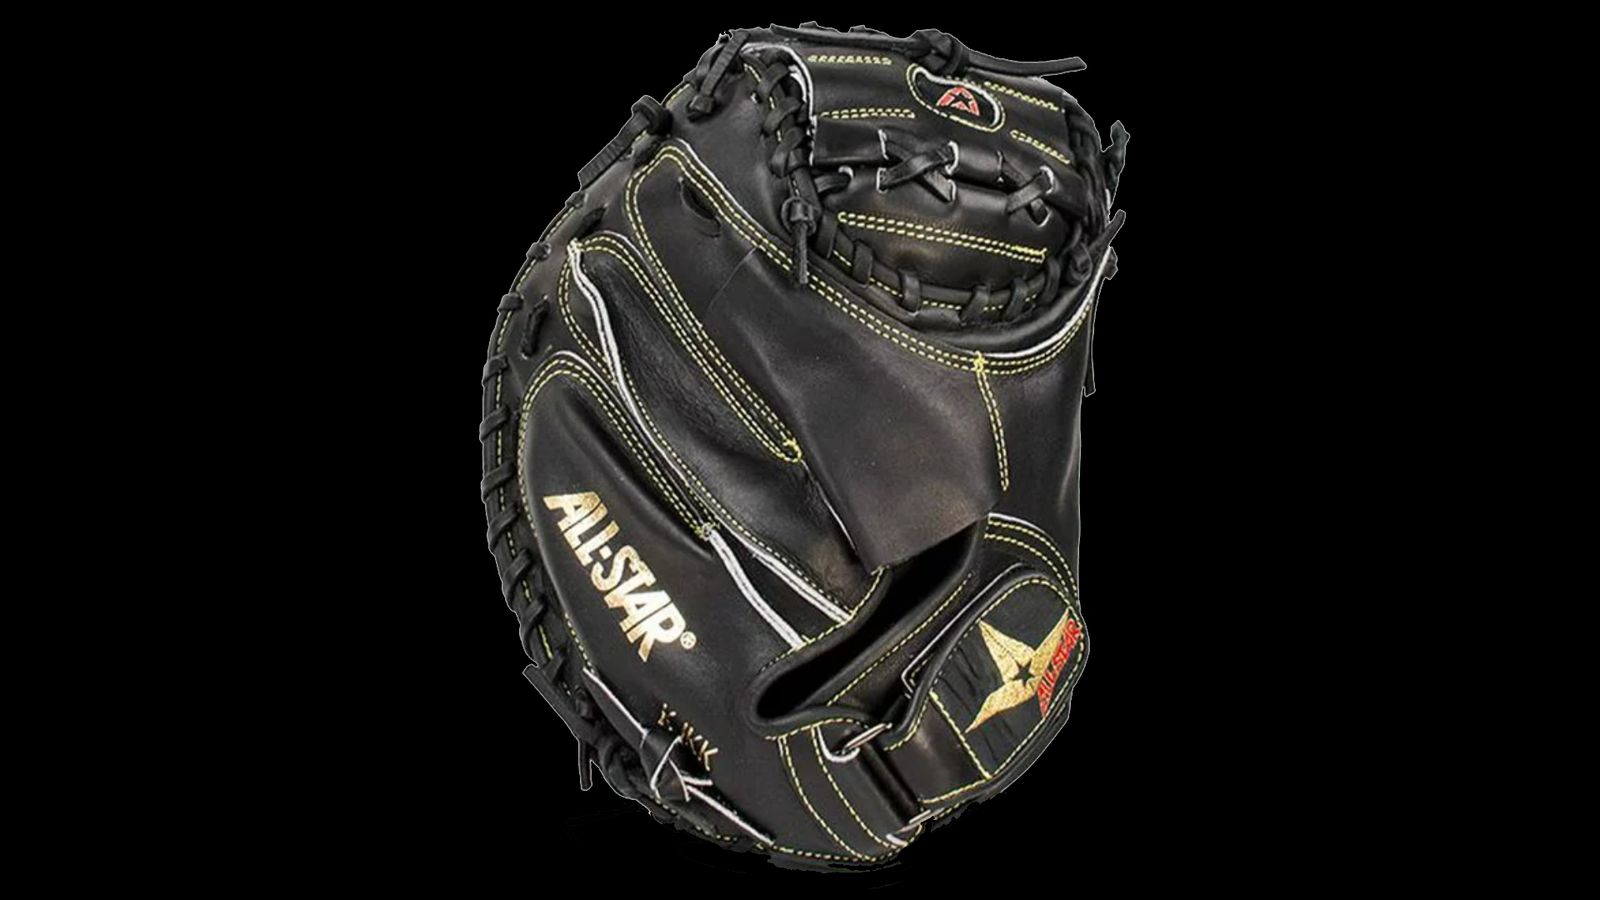 All Star Pro Elite product image of a black glove with gold accents.